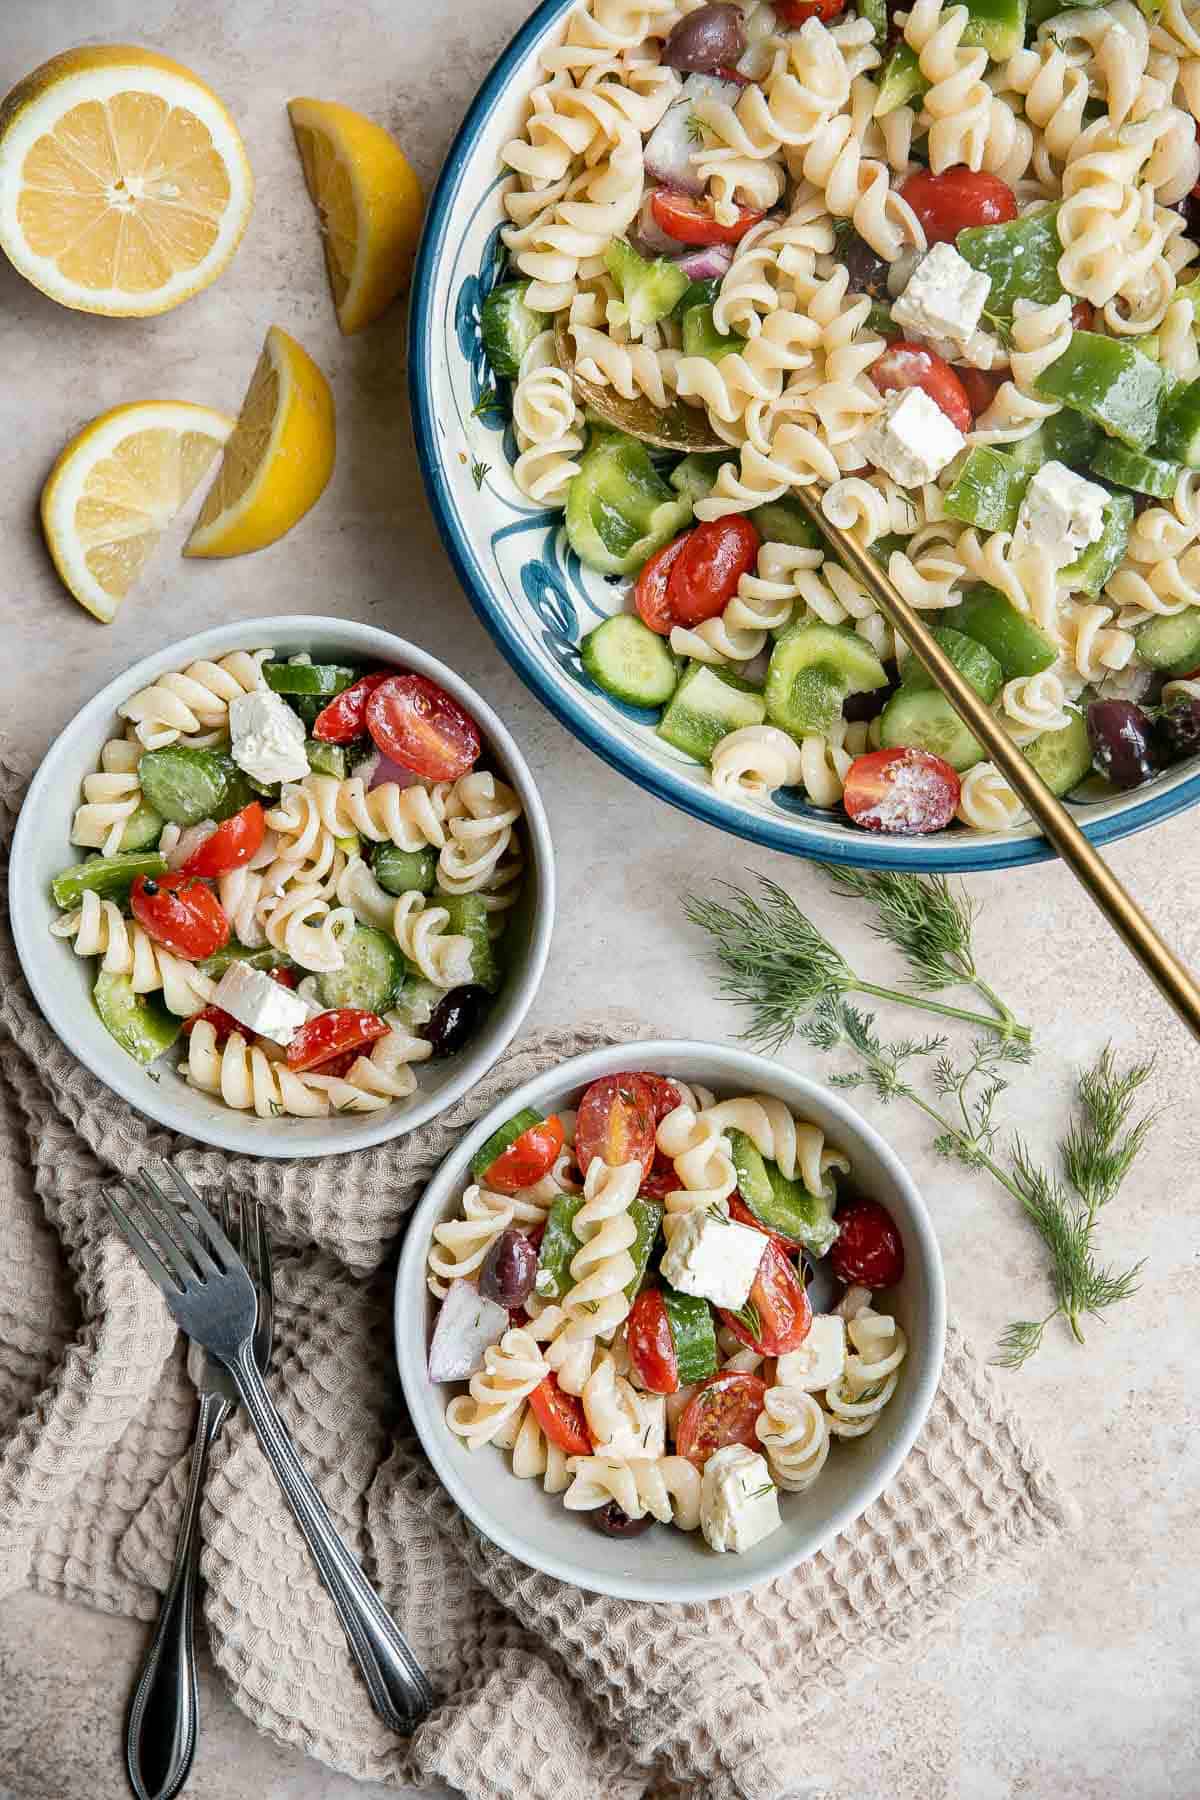 Greek Pasta Salad is quick and easy, loaded with Mediterranean flavors, and delicious. Serve it at a summer cookout or potluck, or meal prep weekly lunches. | aheadofthyme.com